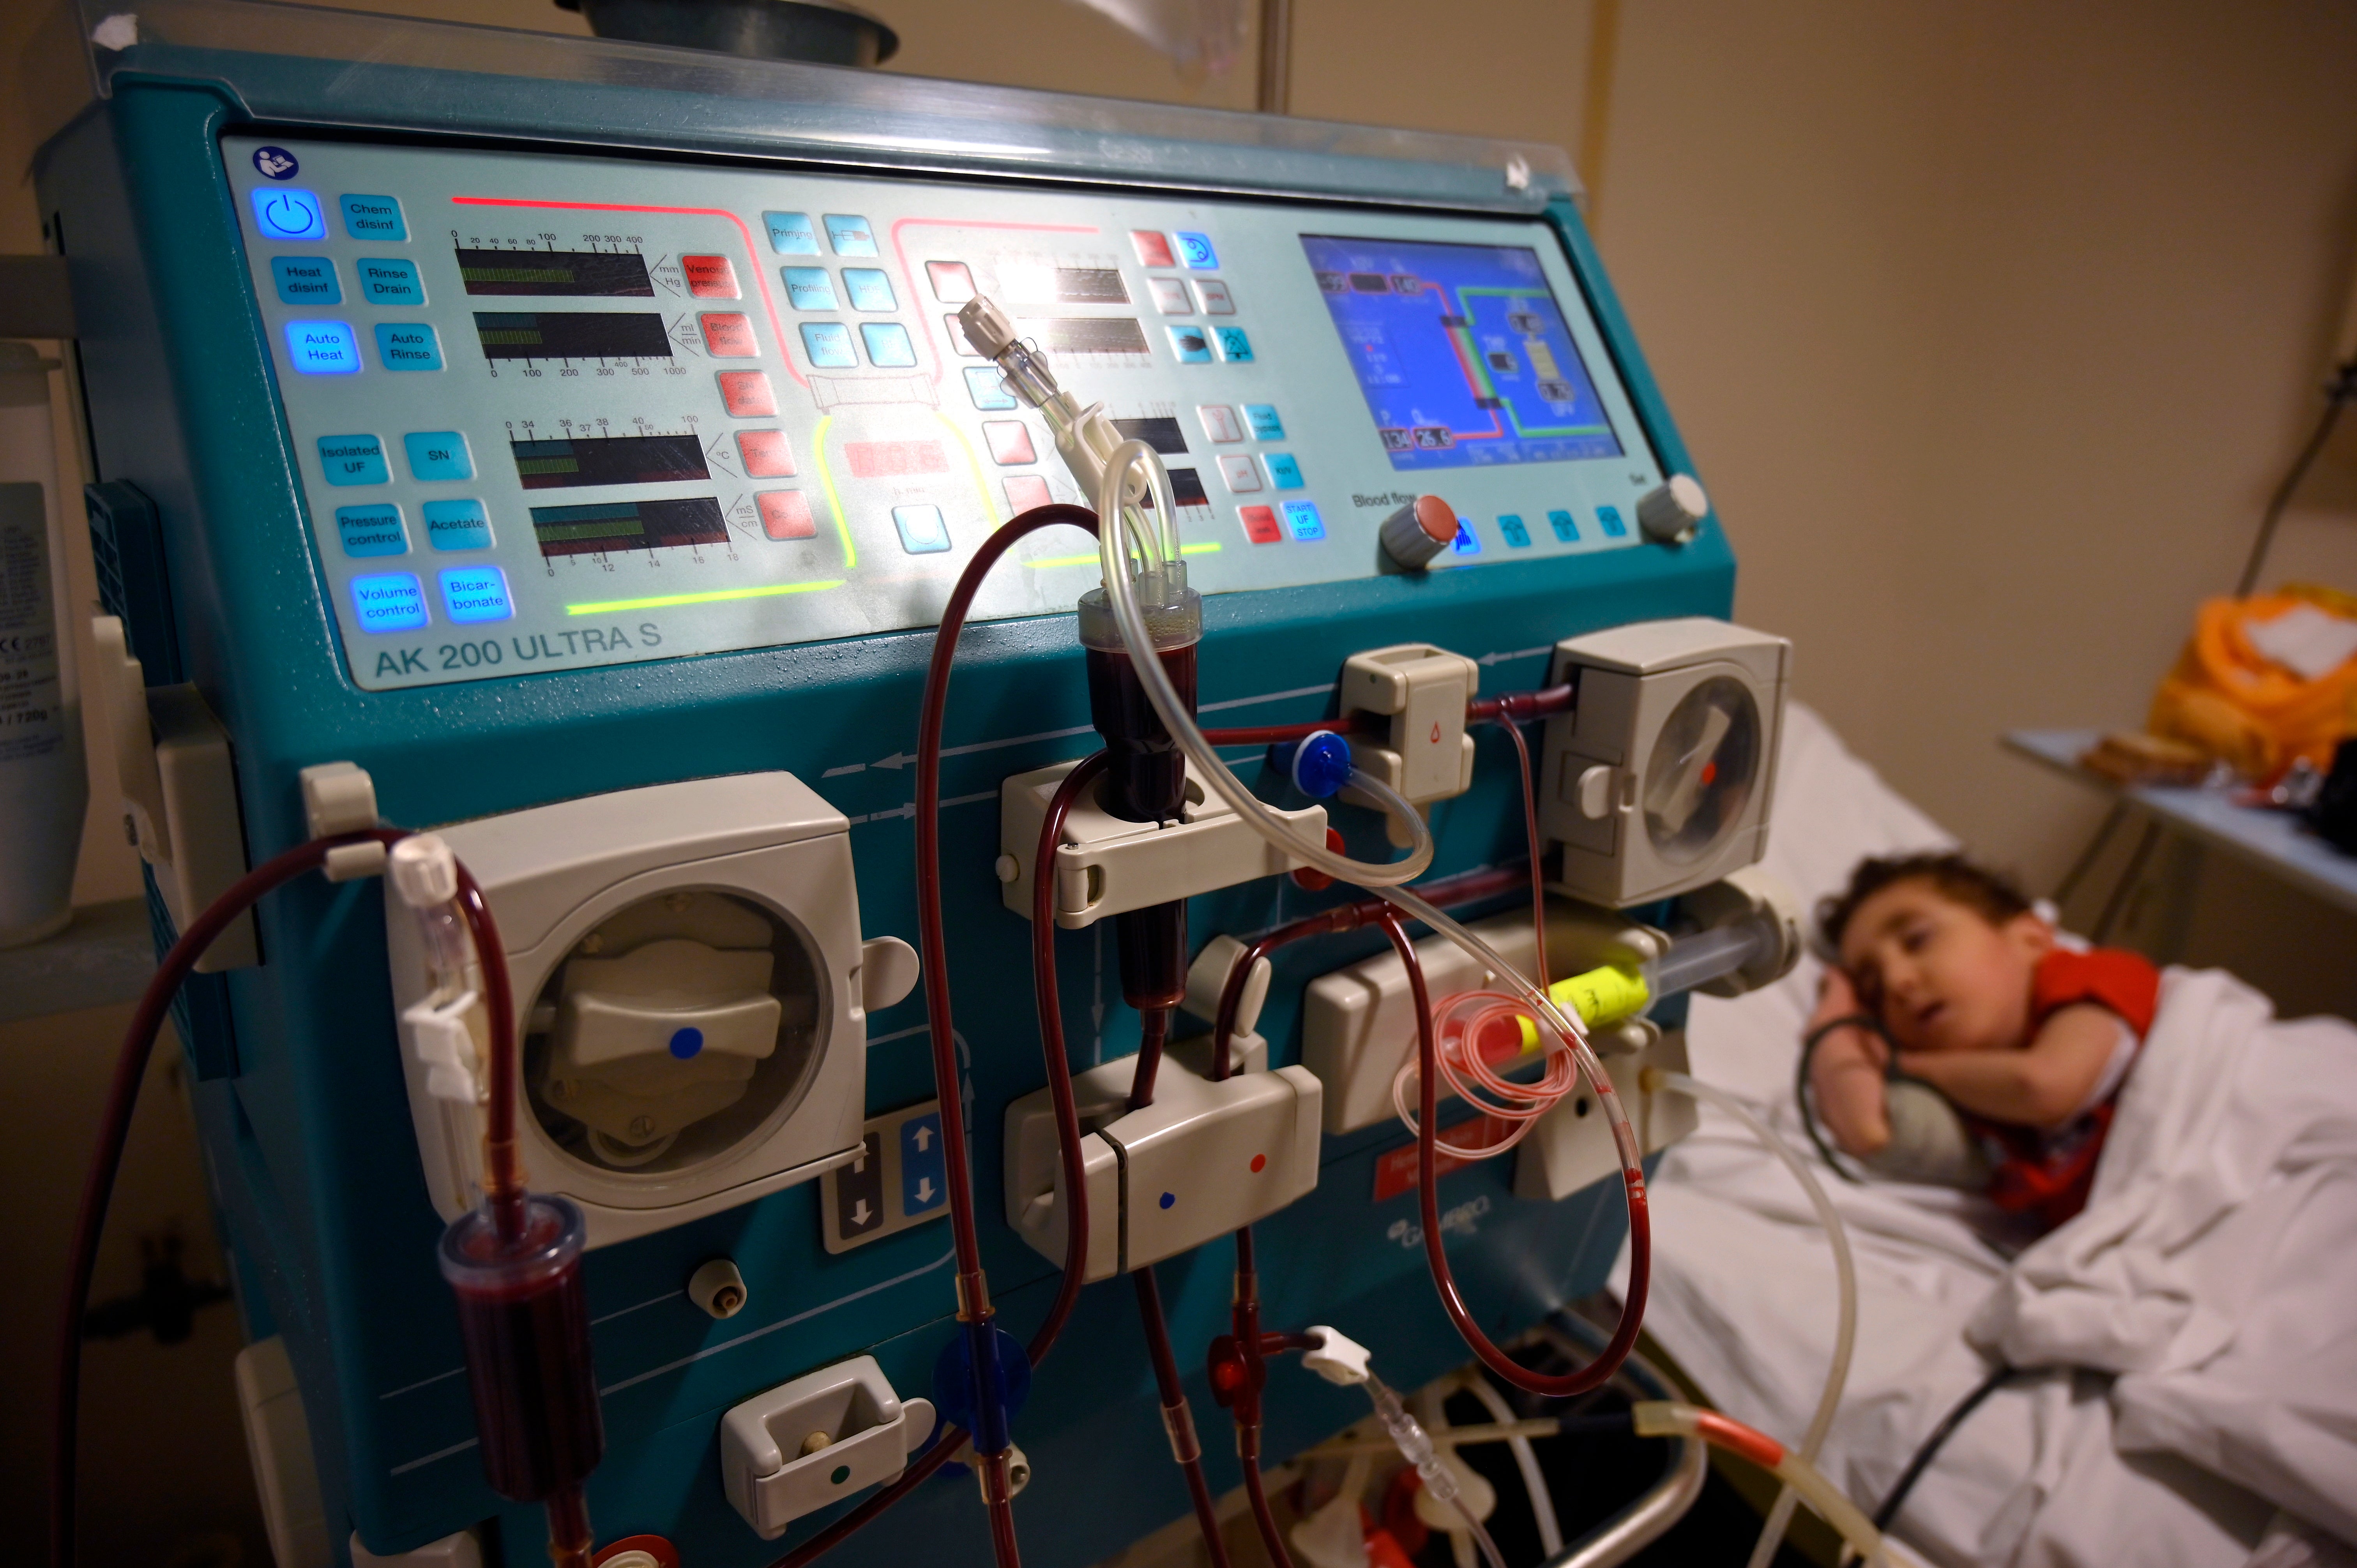 Hospitals in Lebanon warned that they may be forced to suspend kidney dialysis next week amid severe shortages in needed medicines supplies due to the economic situation.